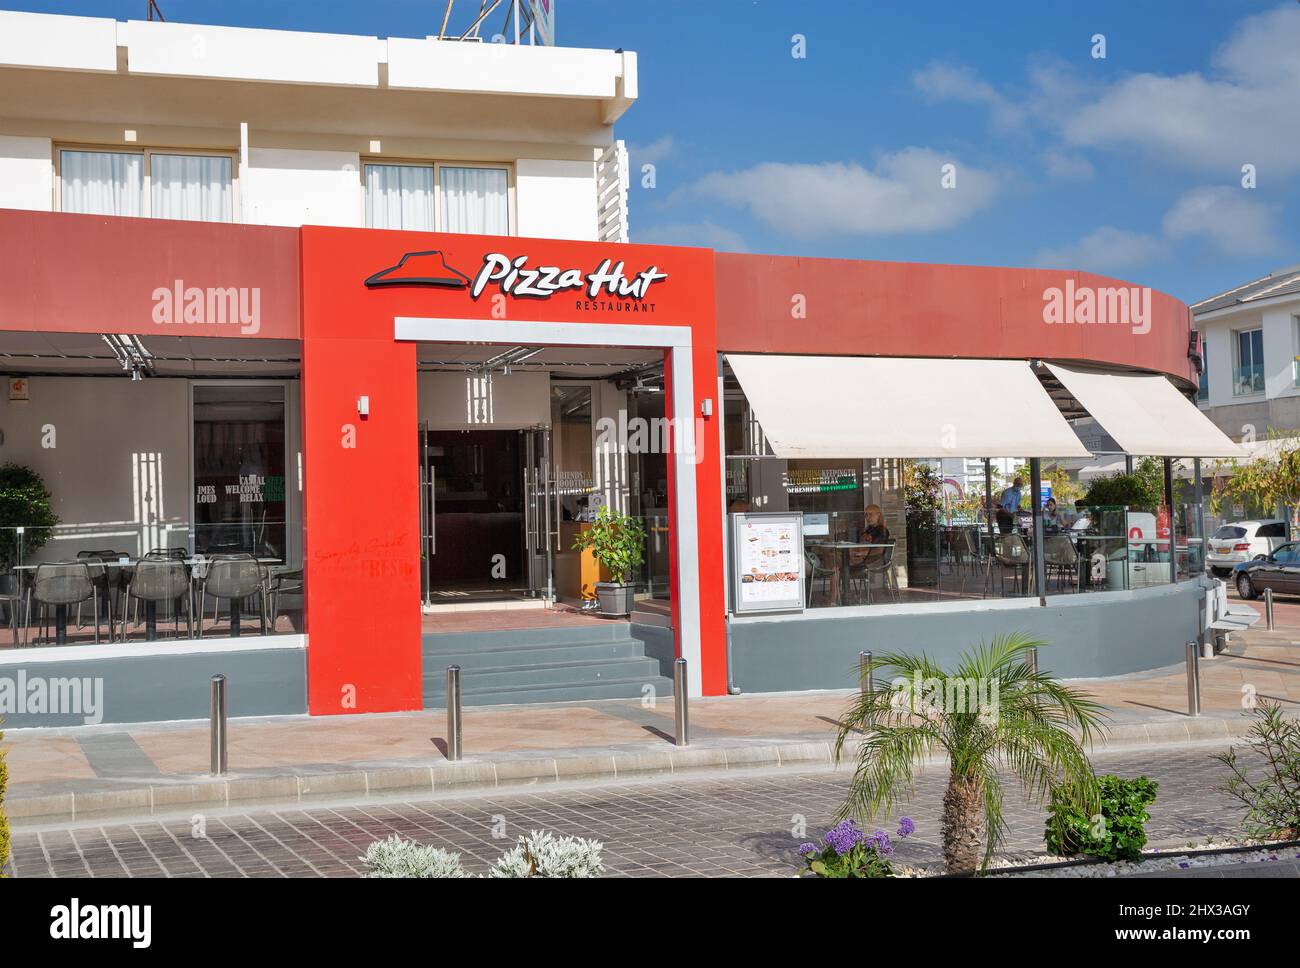 Ayia Napa, Cyprus - May 28, 2021: Pizza Hut restaurant, an American multinational chain founded 1958. They serve their signature pan pizza and other d Stock Photo